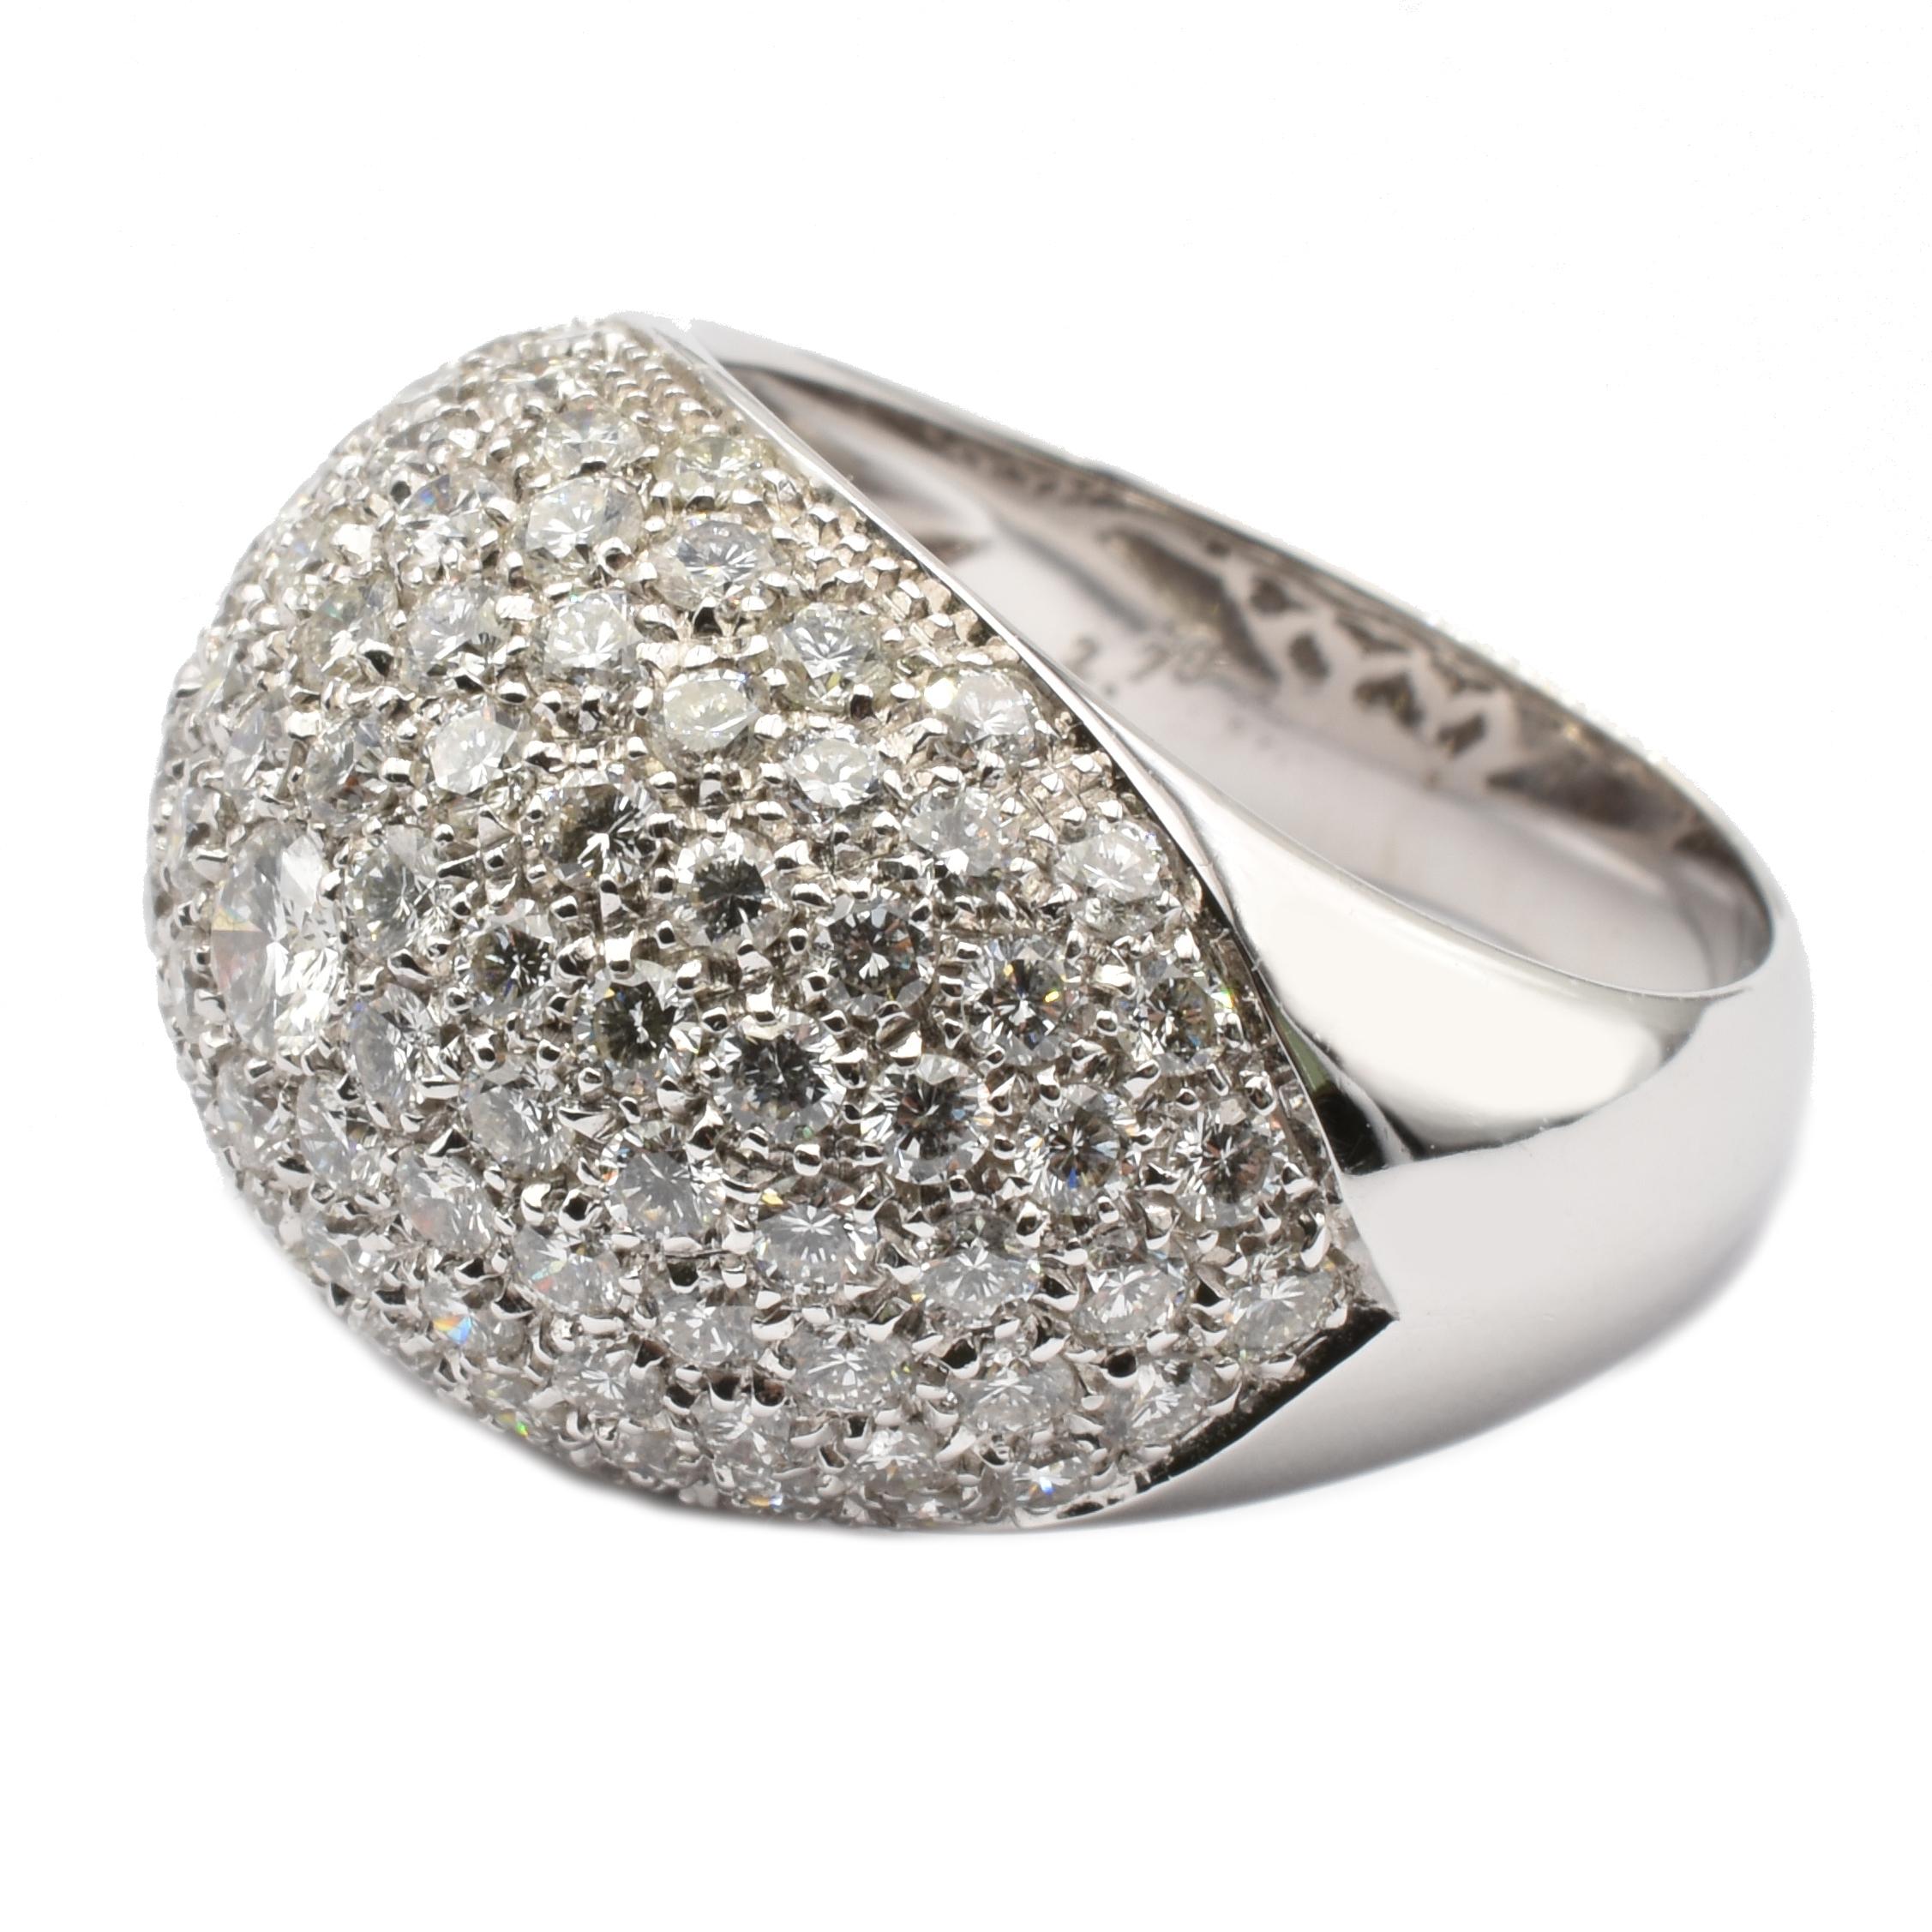 Gilberto Cassola 18Kt White Gold Diamond Paveè Ring
A Classy and Timeless Diamond Paveè Ring perfect for an Elegant Dinner and for an Everyday use too.
HAndmade in our Atelier in Valenza (AL) Italy. 
18Kt White Gold g 10,20
G Vs Diamonds ct 2,79